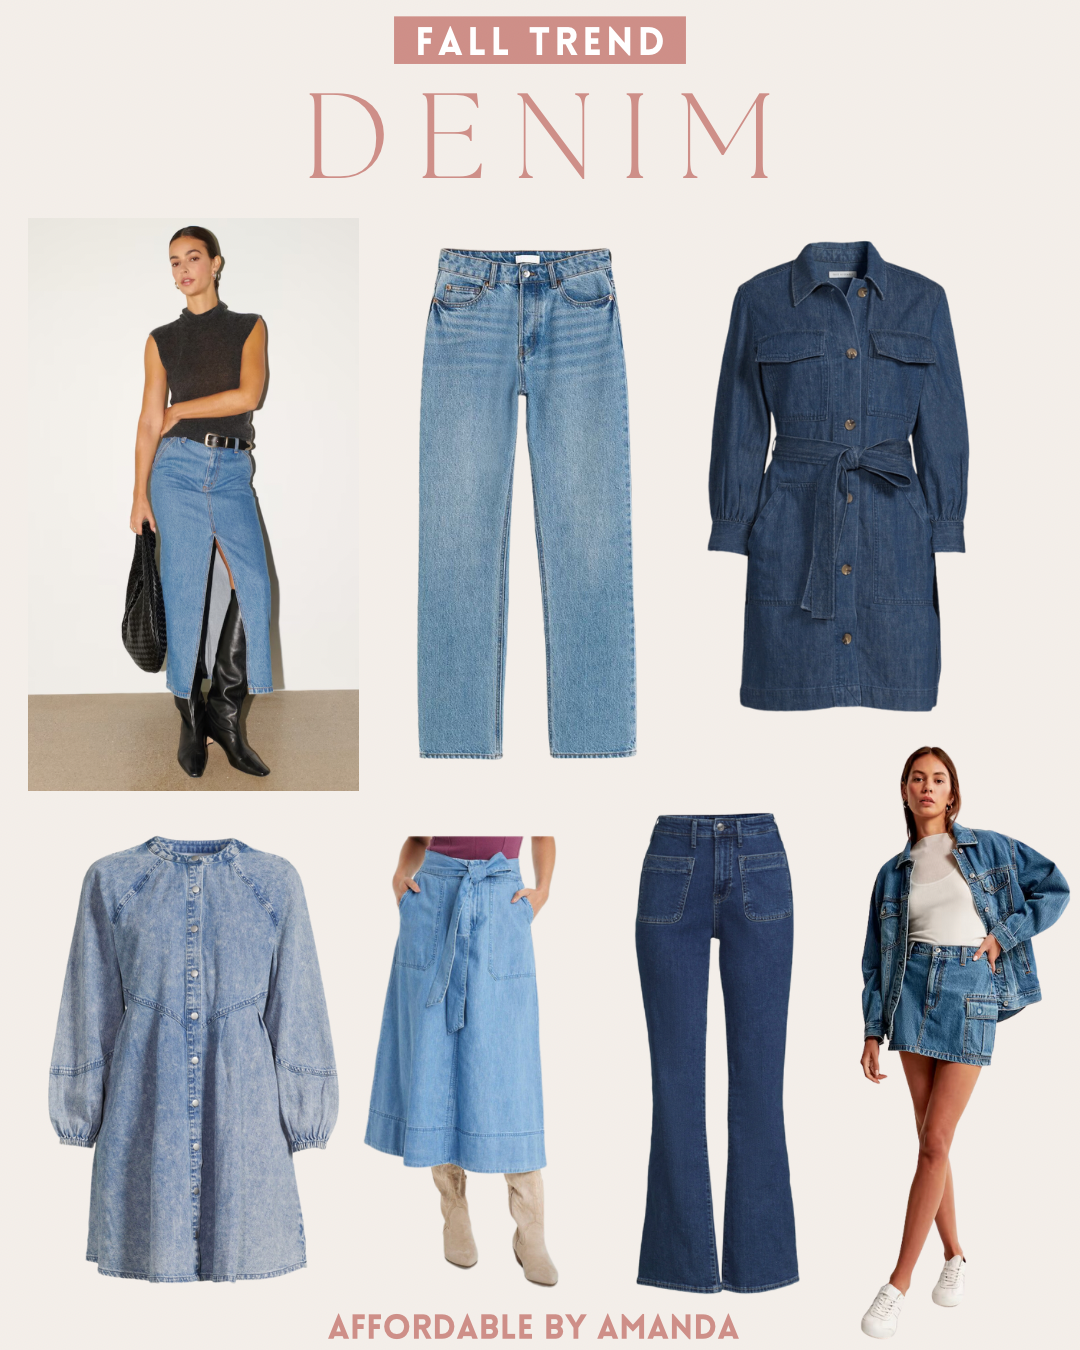 7 Fall 2023 Fashion Trends to Shop Now - Denim Fall Trend